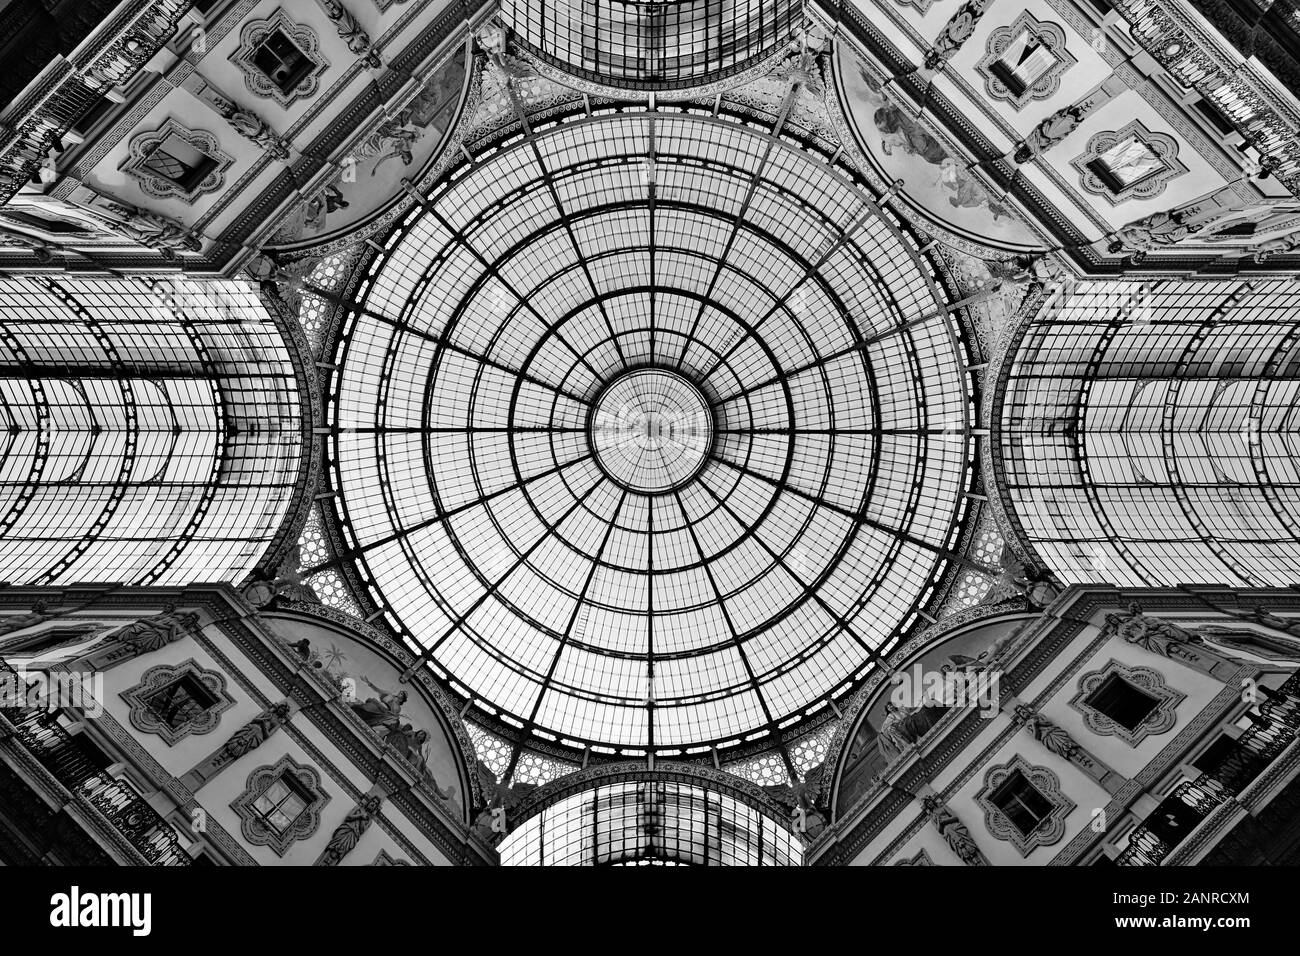 Glass dome and buildings of 'Galleria Vittorio Emanuele' - Milan, Italy Stock Photo